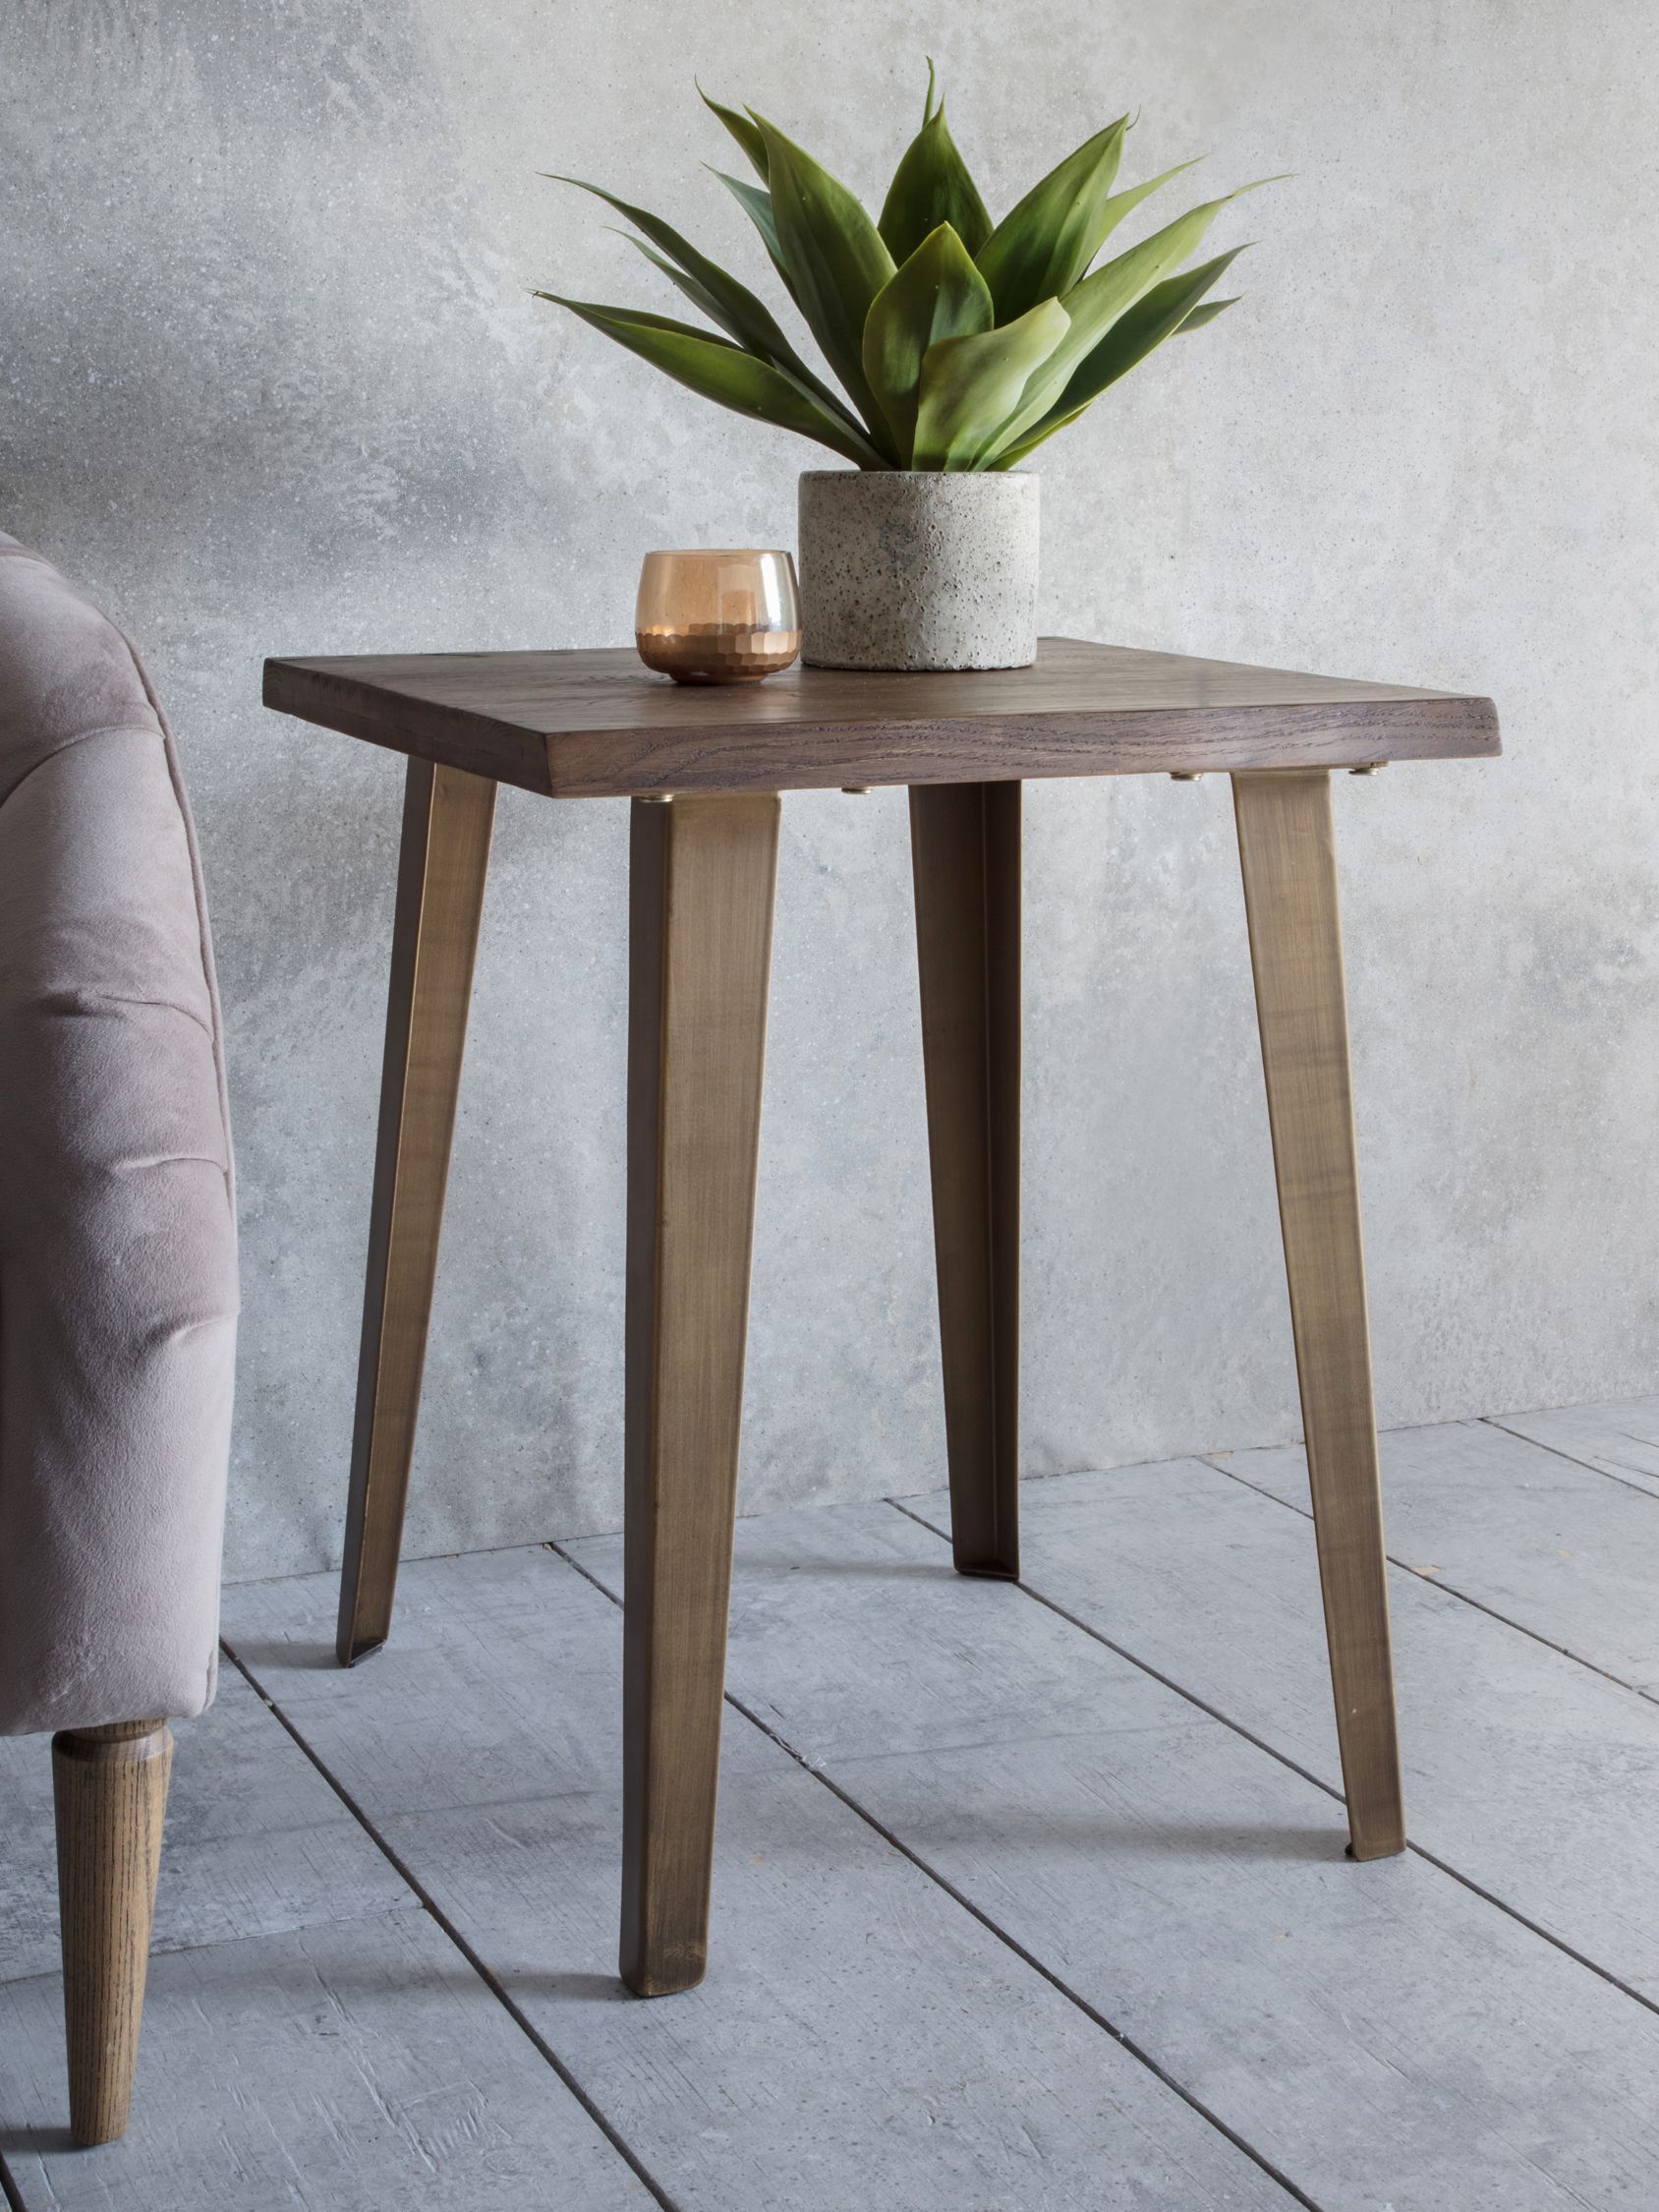 Hudson Living Foundry Side Table, Smoked Oak